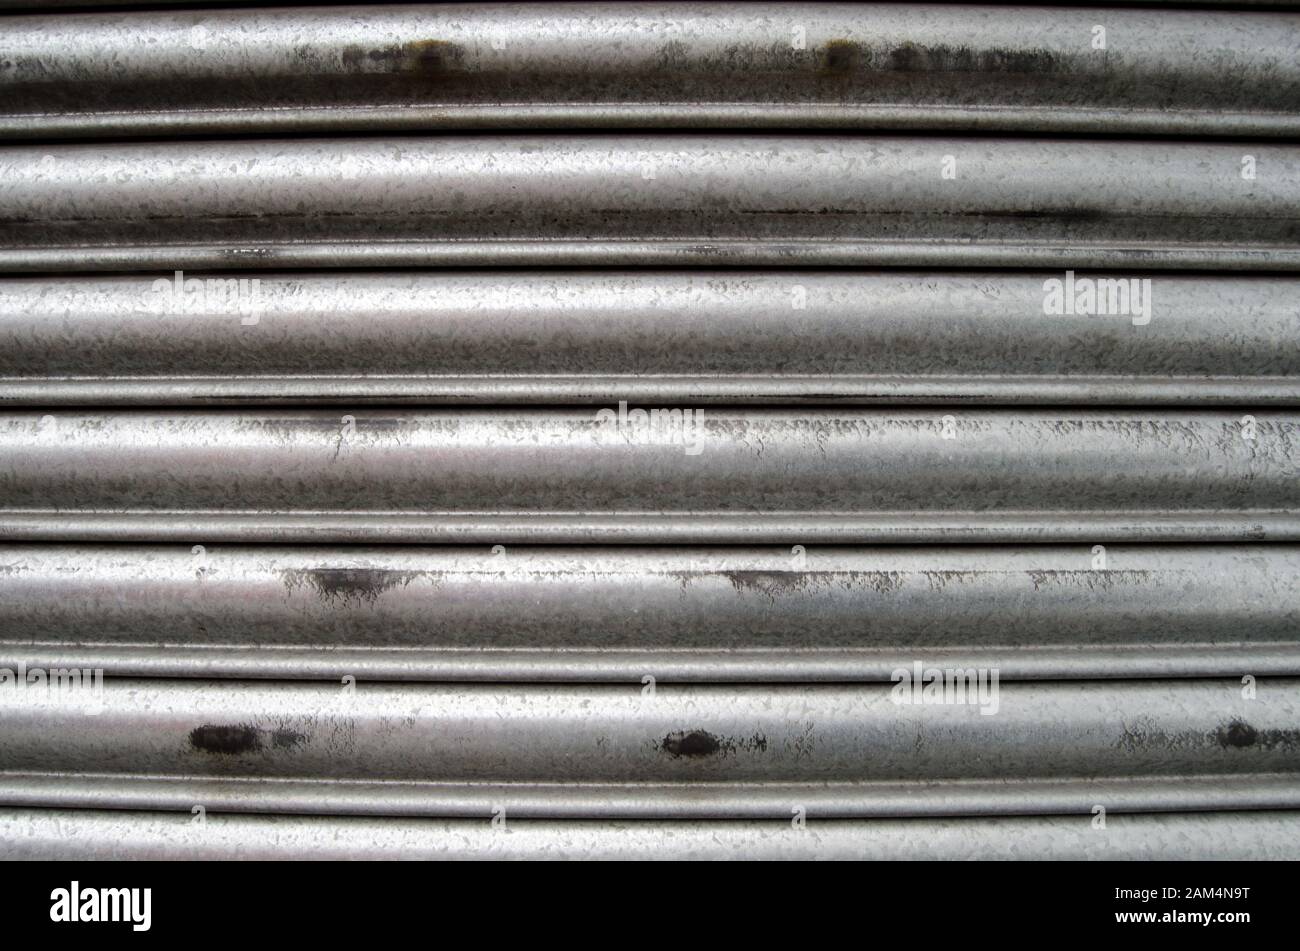 Detail of a closed metal security shutter.  Suitable for use as grunge background or wallpaper. Stock Photo